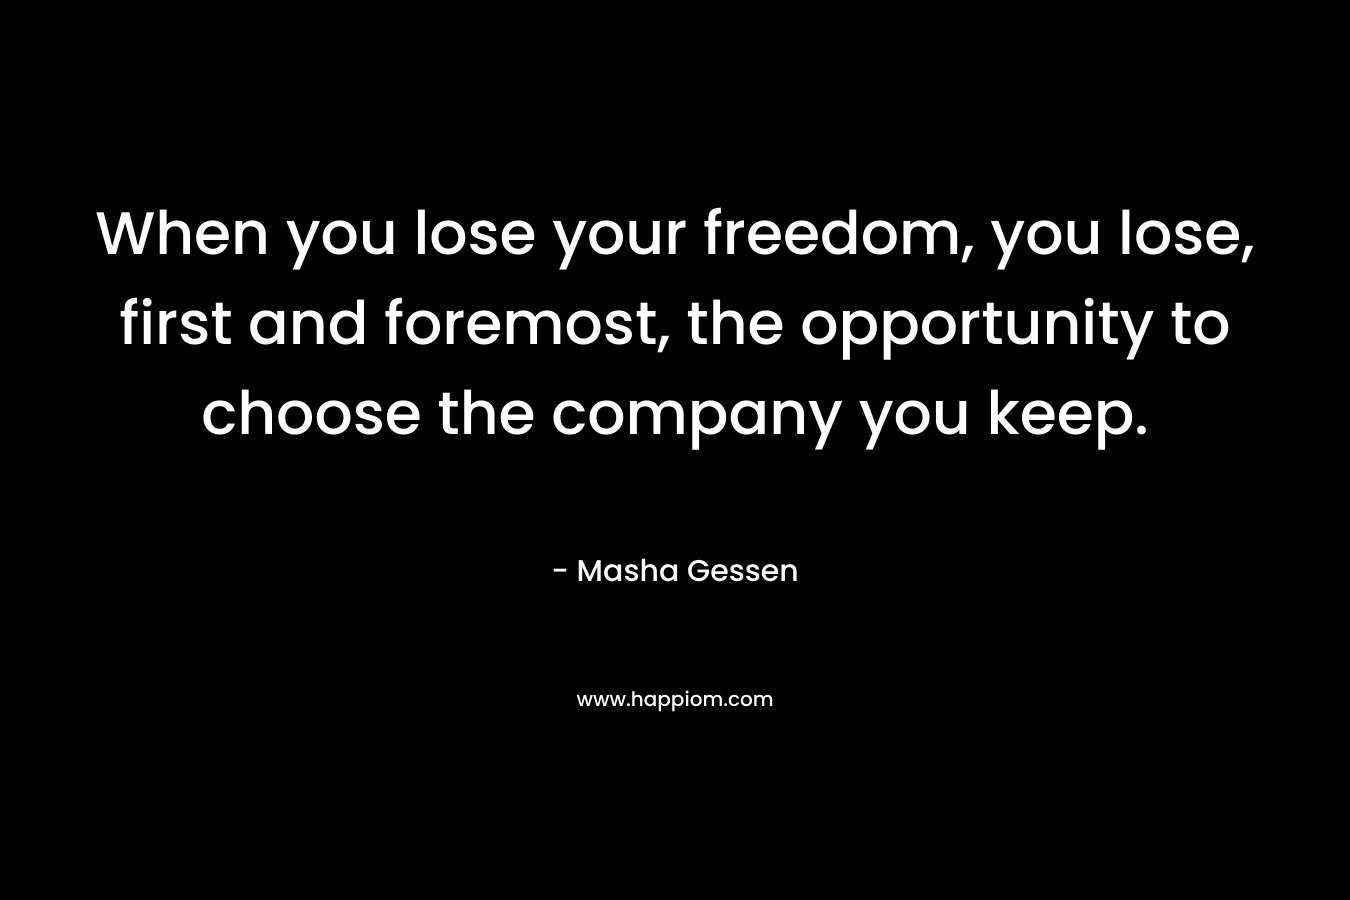 When you lose your freedom, you lose, first and foremost, the opportunity to choose the company you keep.